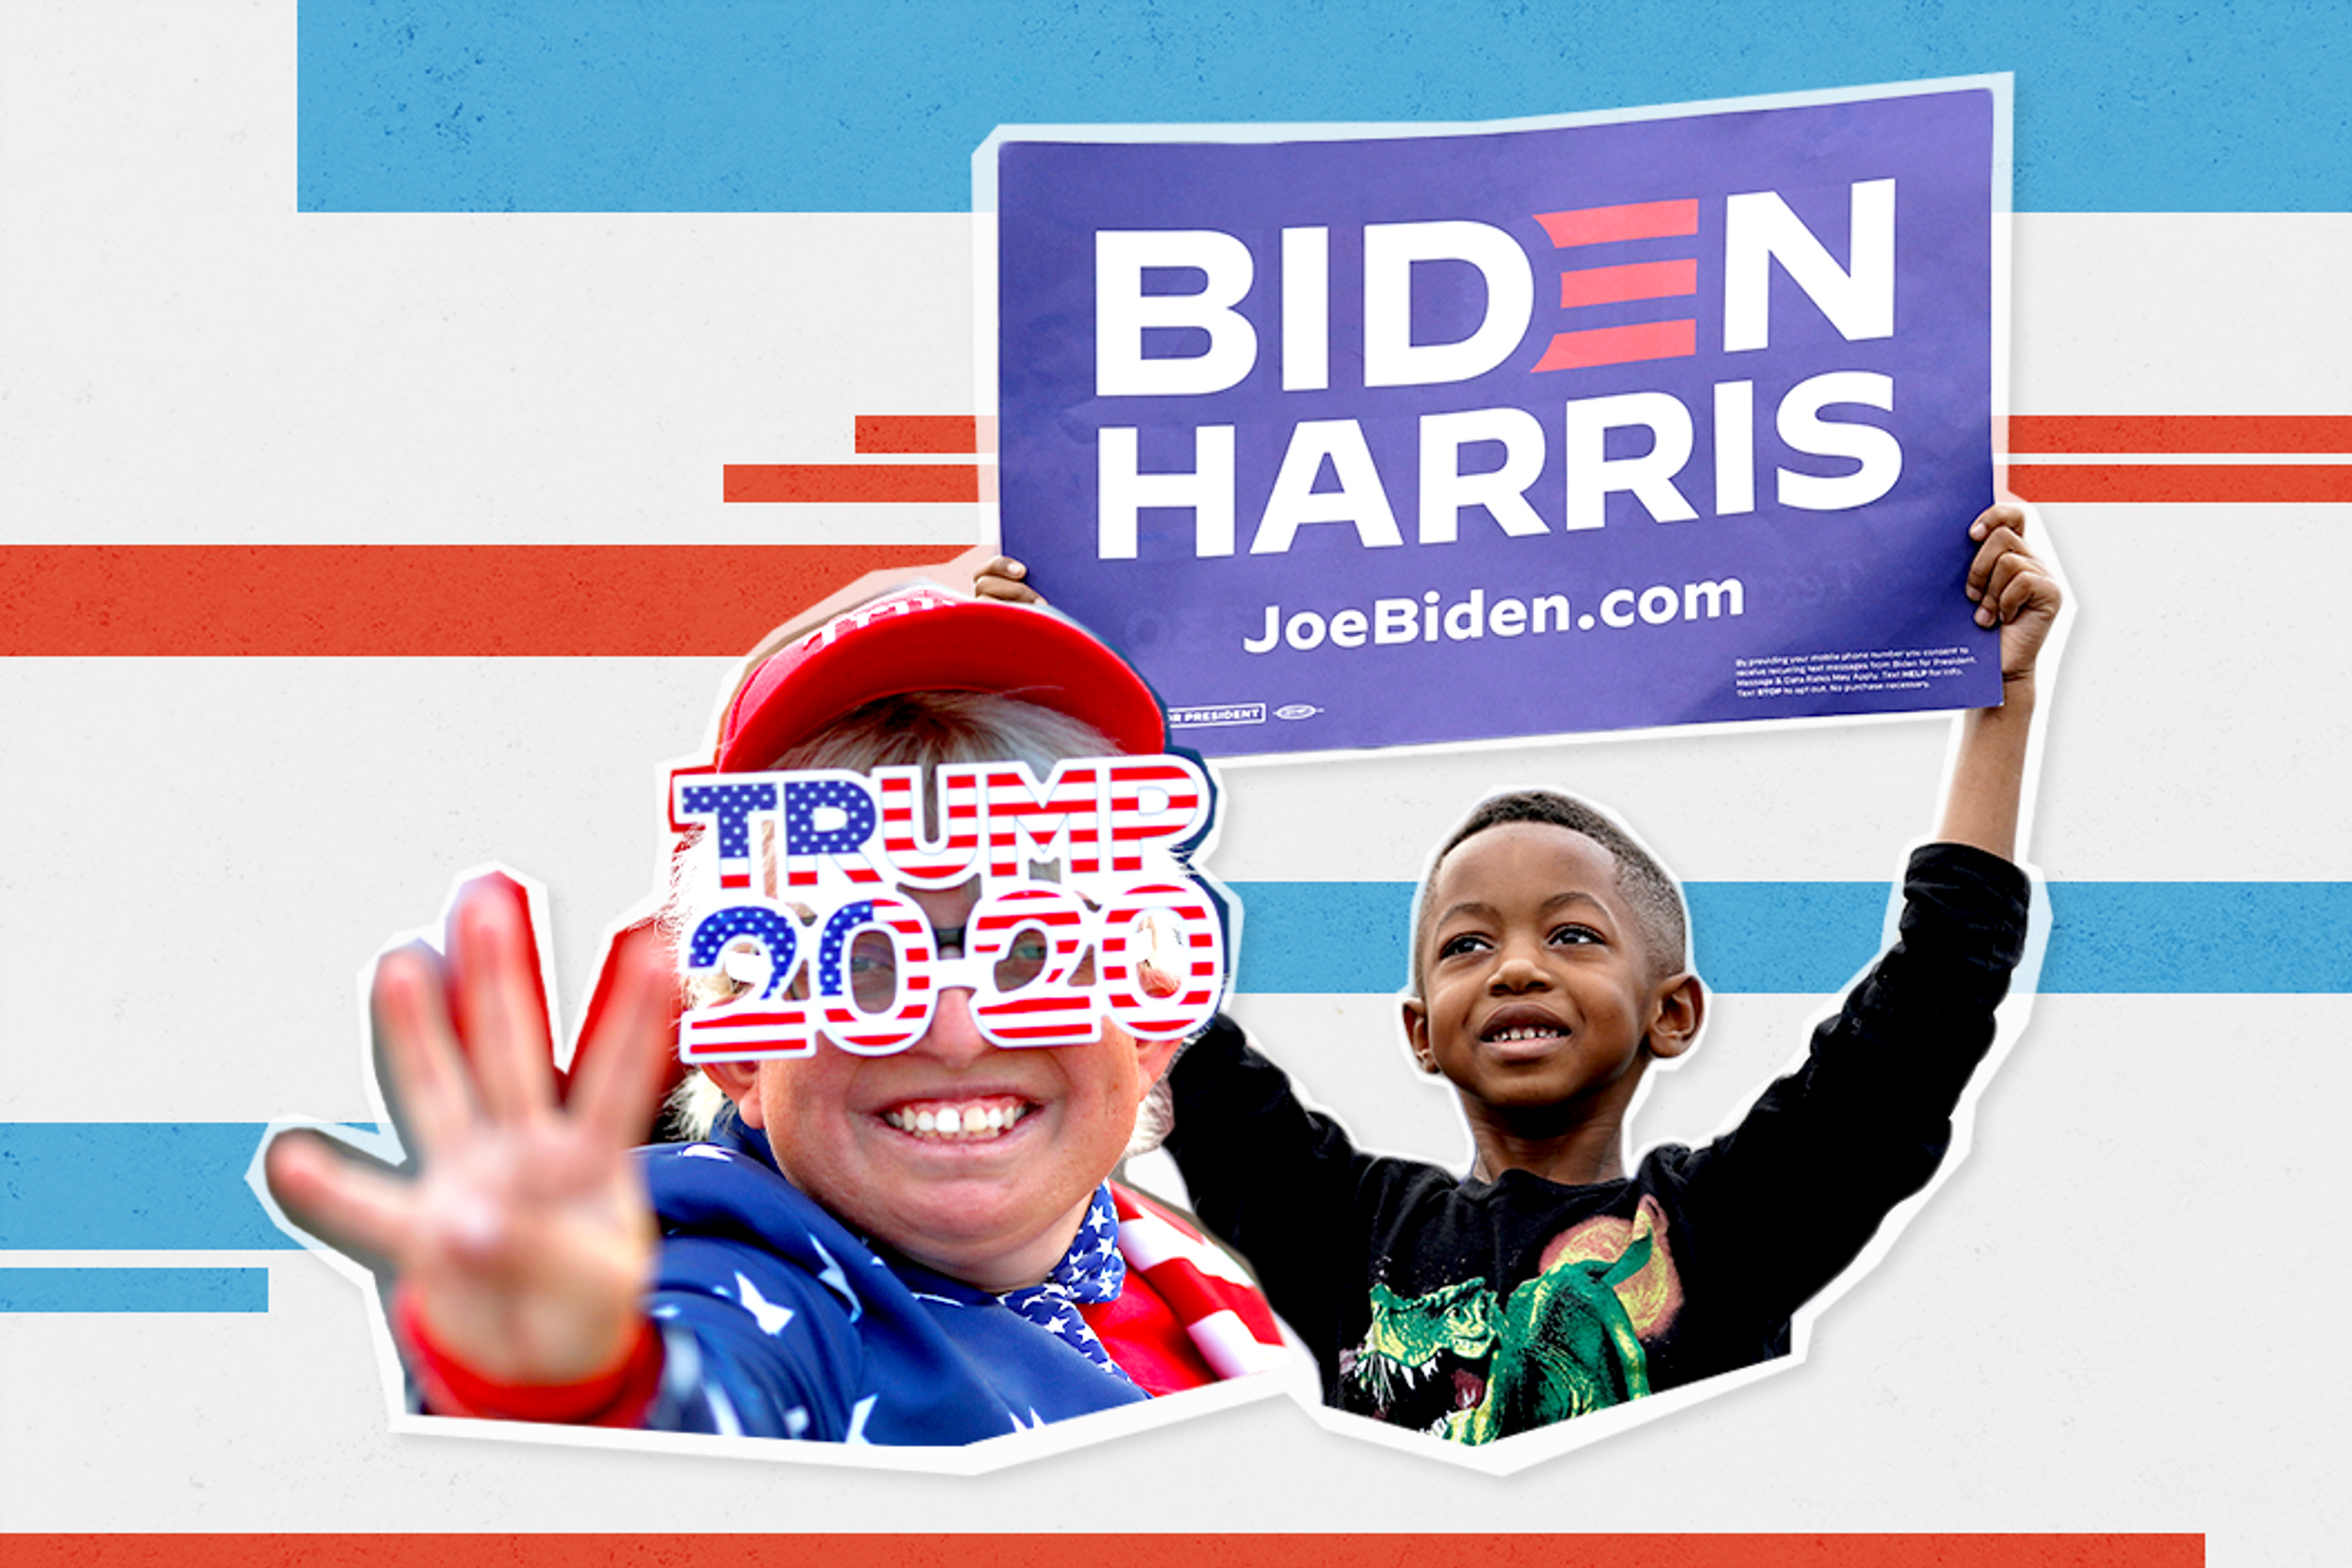 Images of a Trump supporter and child holding a Biden-Harris sign